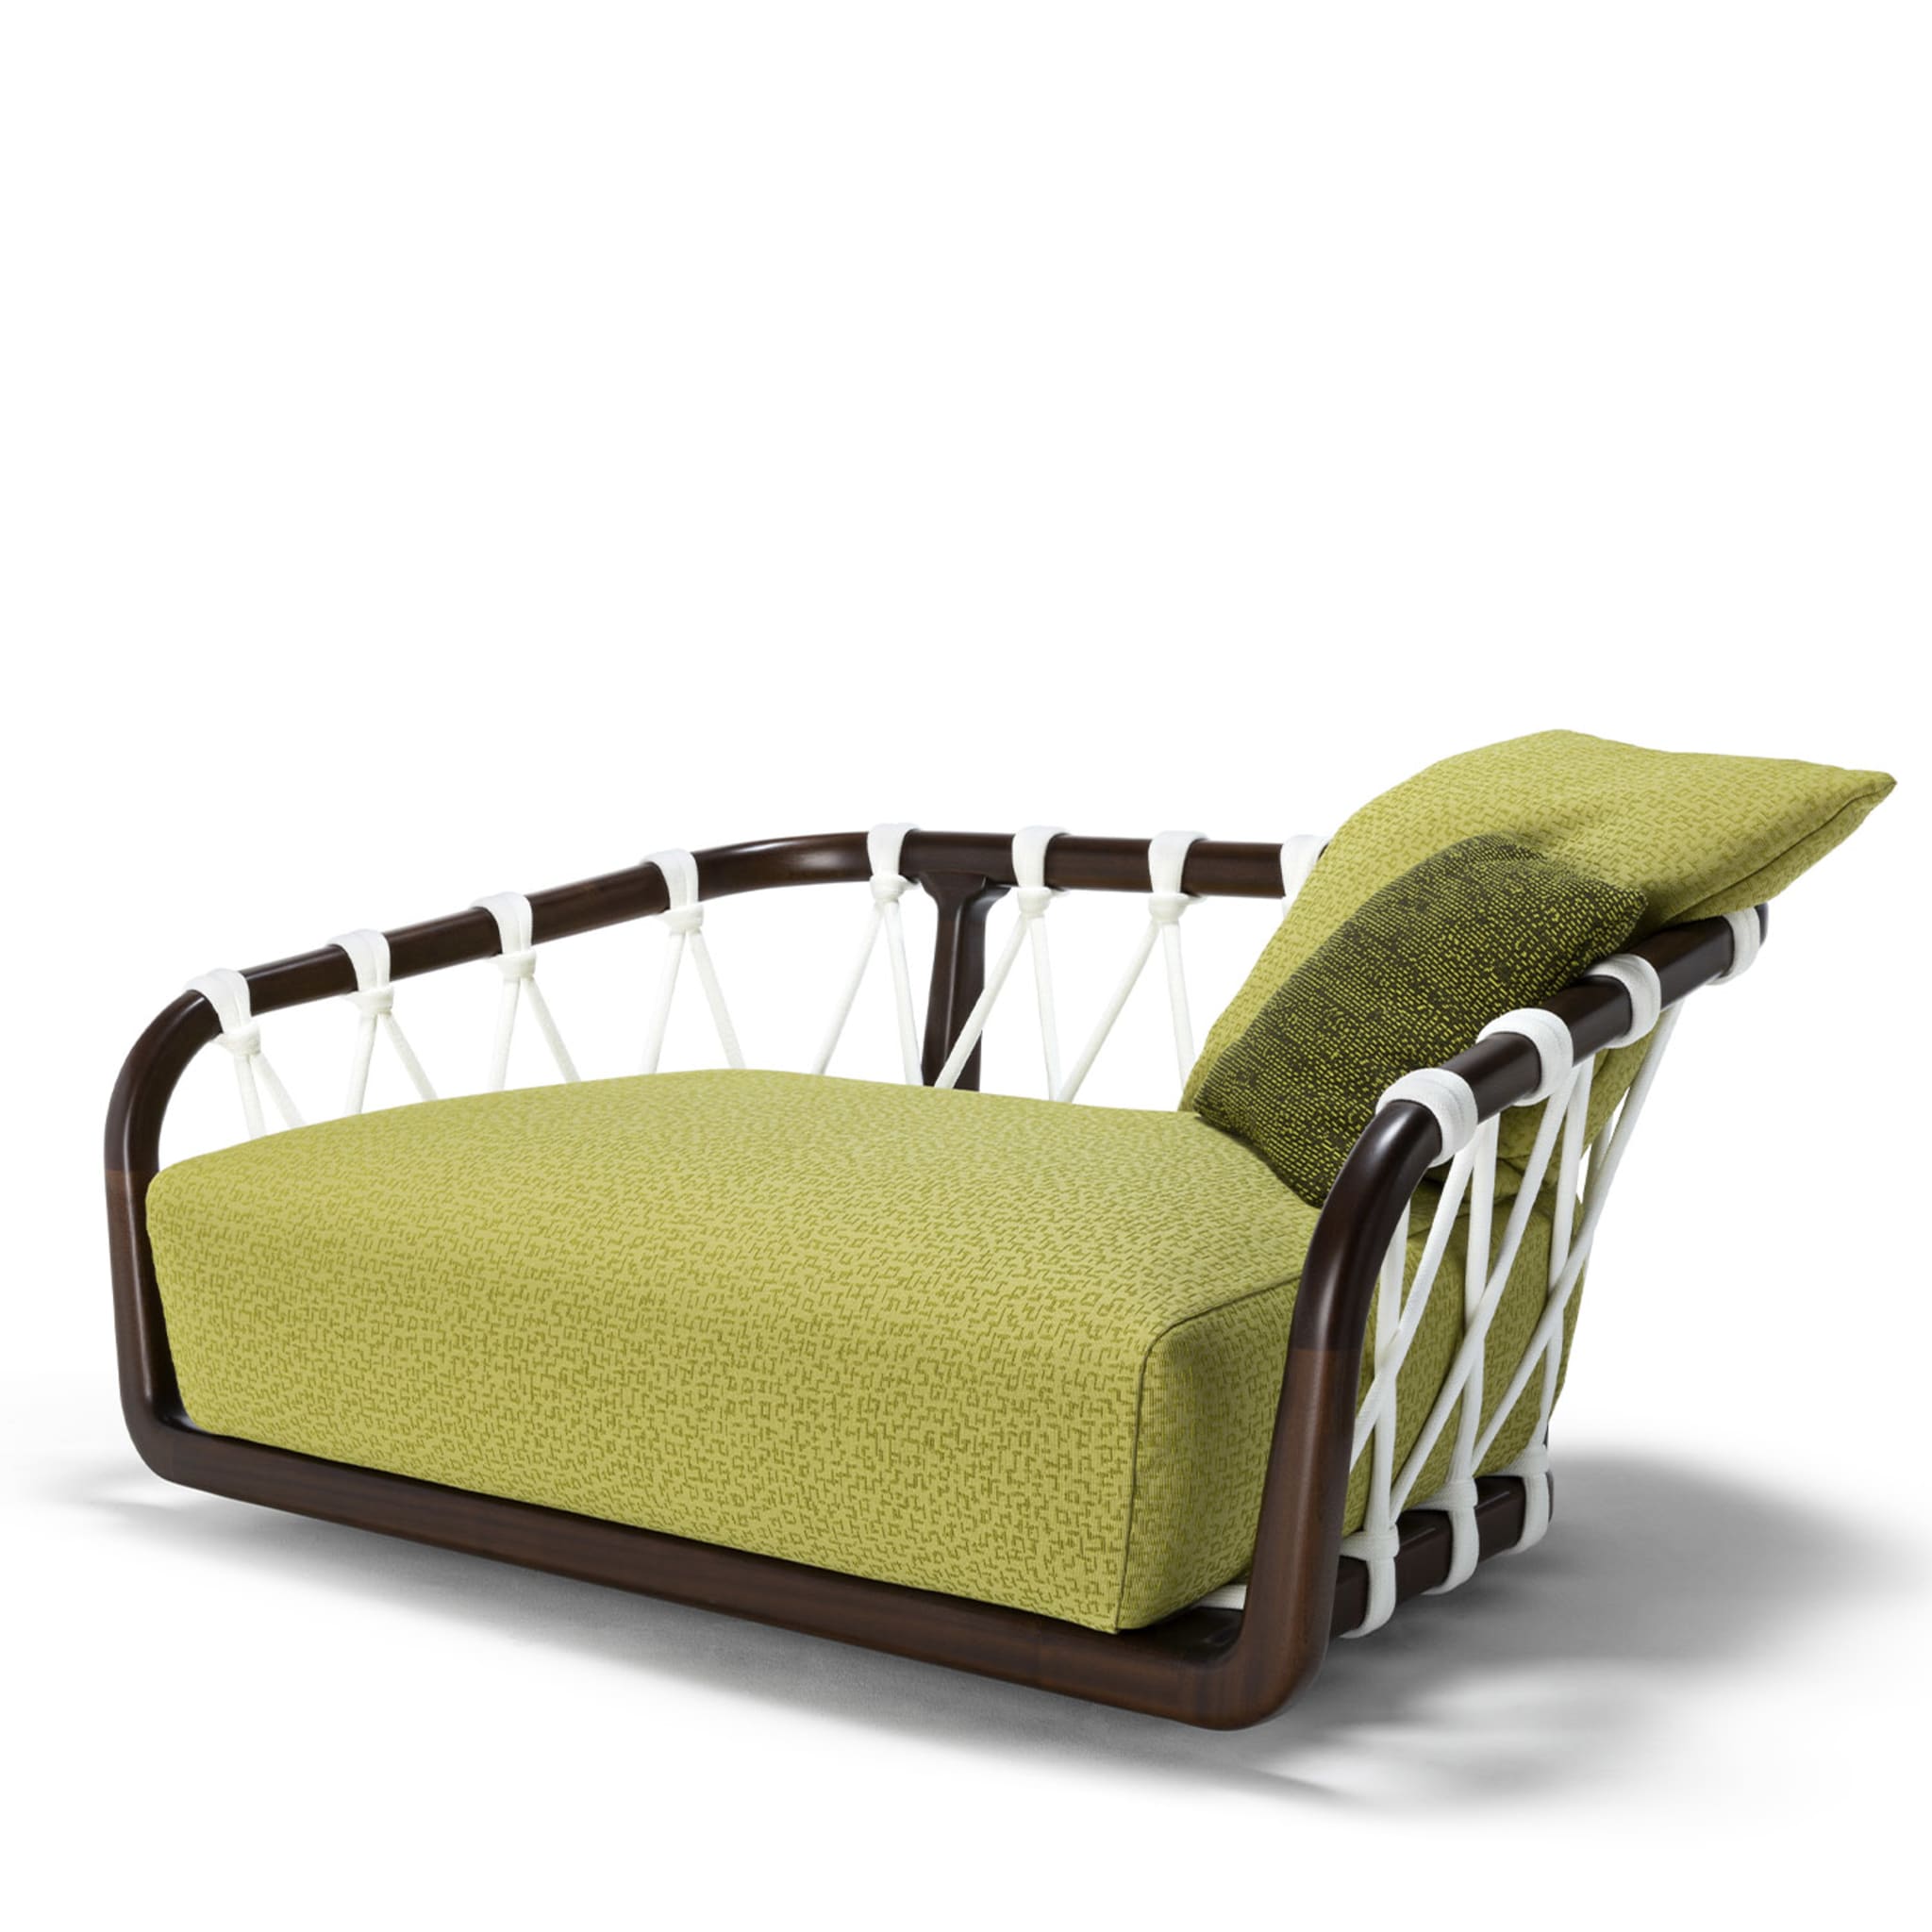 Sunset Basket Small Barrique + Green Sofa by Paola Navone - Alternative view 2